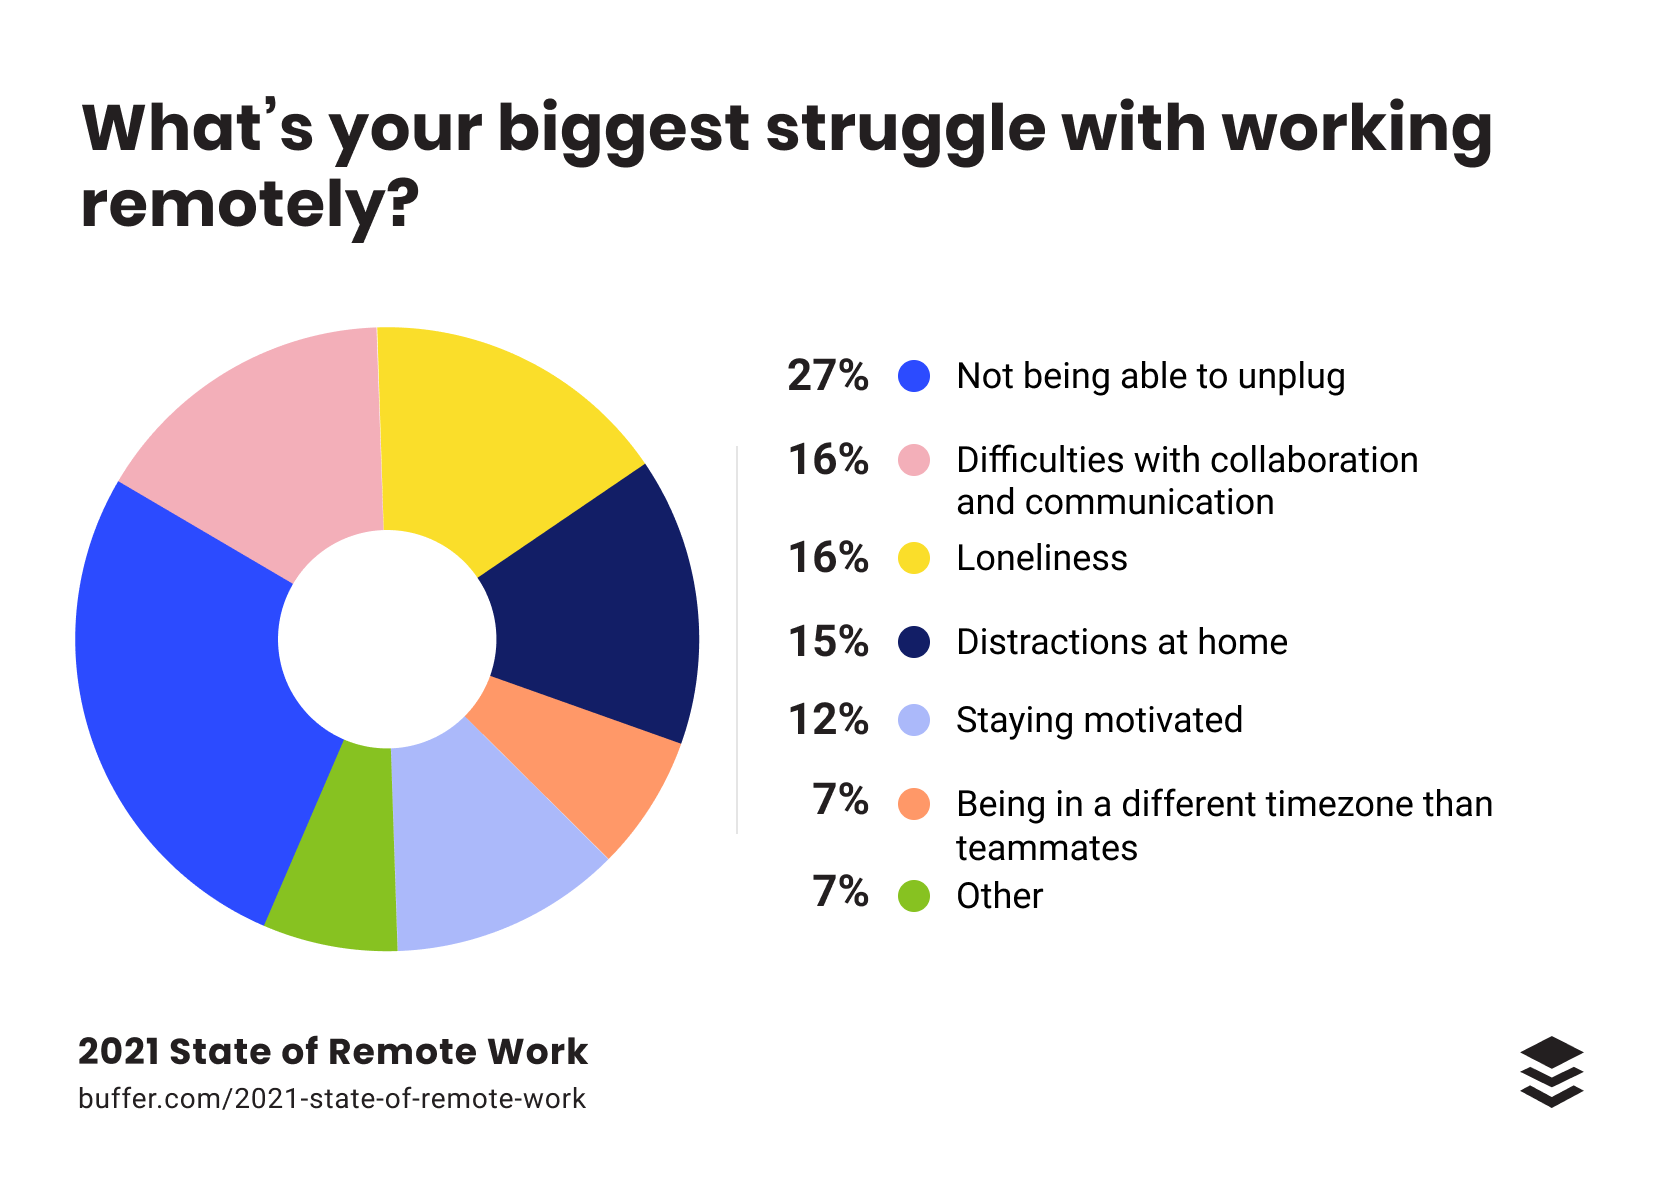 Buffer’s 2021 State of Remote Work report